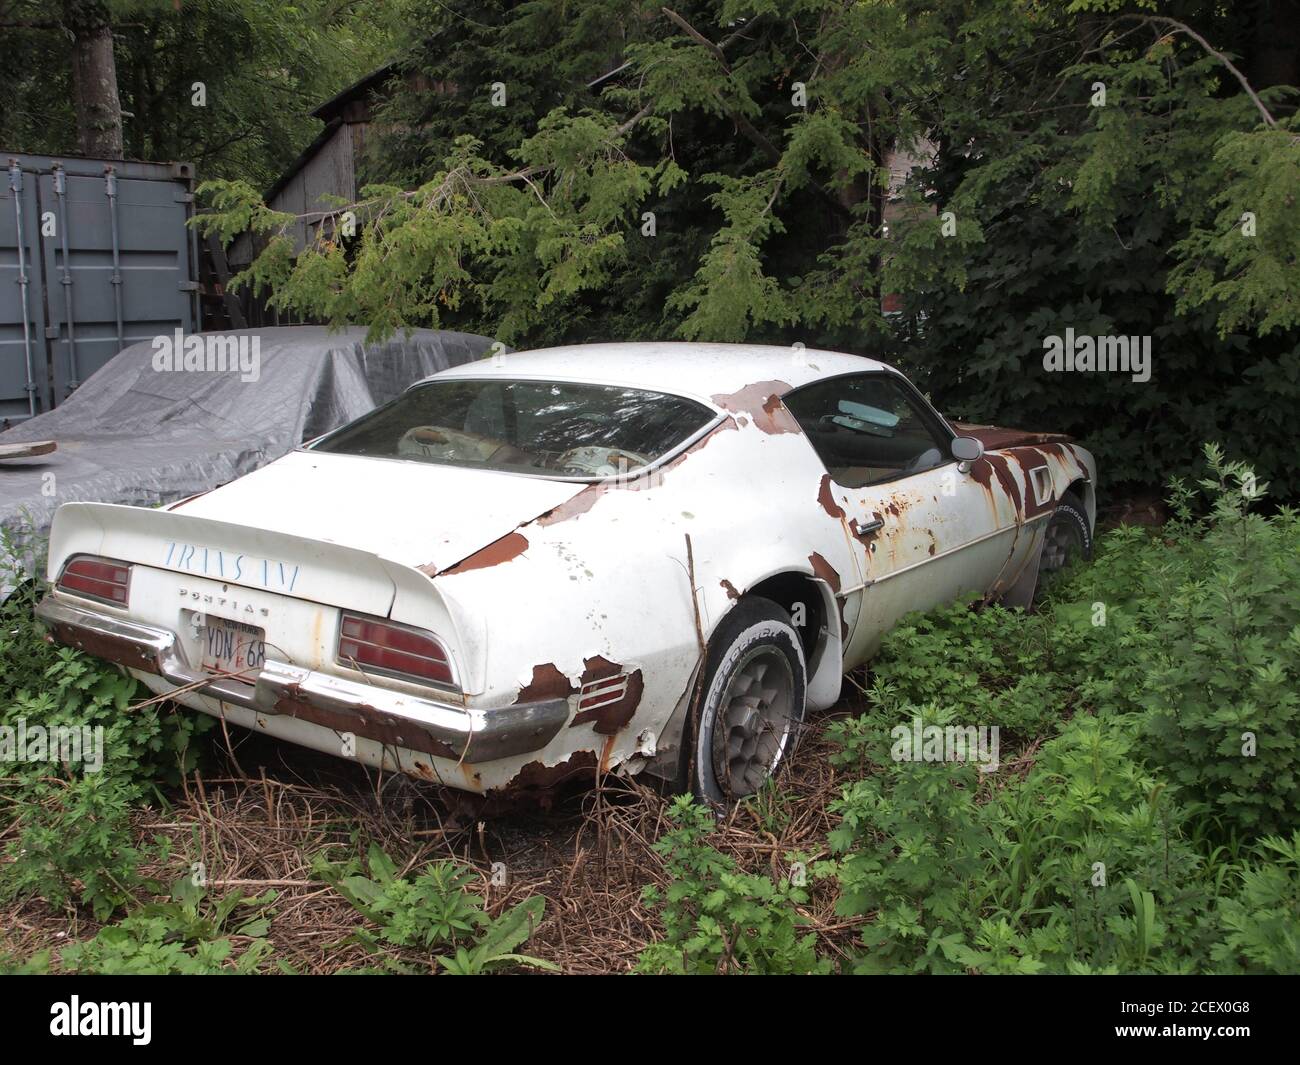 Abandoned classic cars in a filed in Sussex County, New Jersey. A white Pontiac Firebird Trans Am and two early Chrysler products rust away. Stock Photo